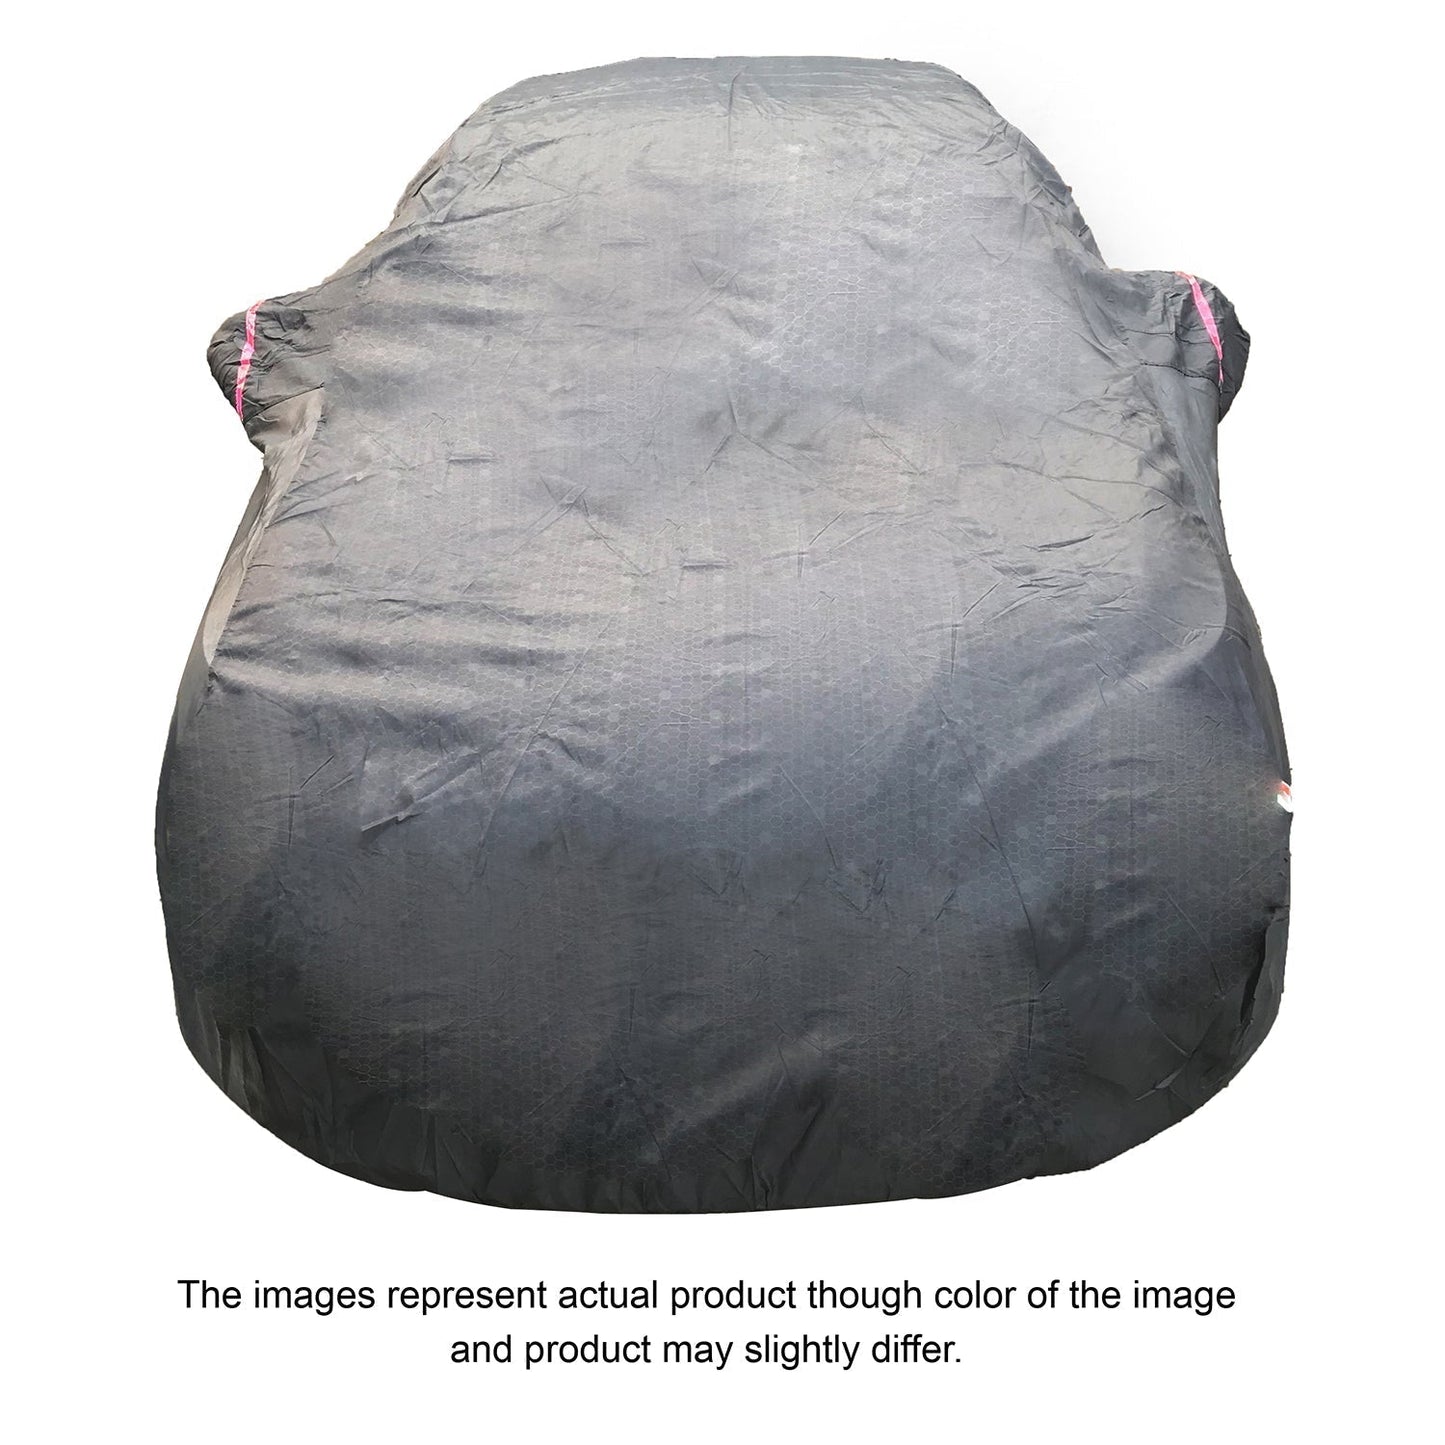 Oshotto 100% Dust Proof, Water Resistant Grey Car Body Cover with Mirror Pocket For Audi Q3